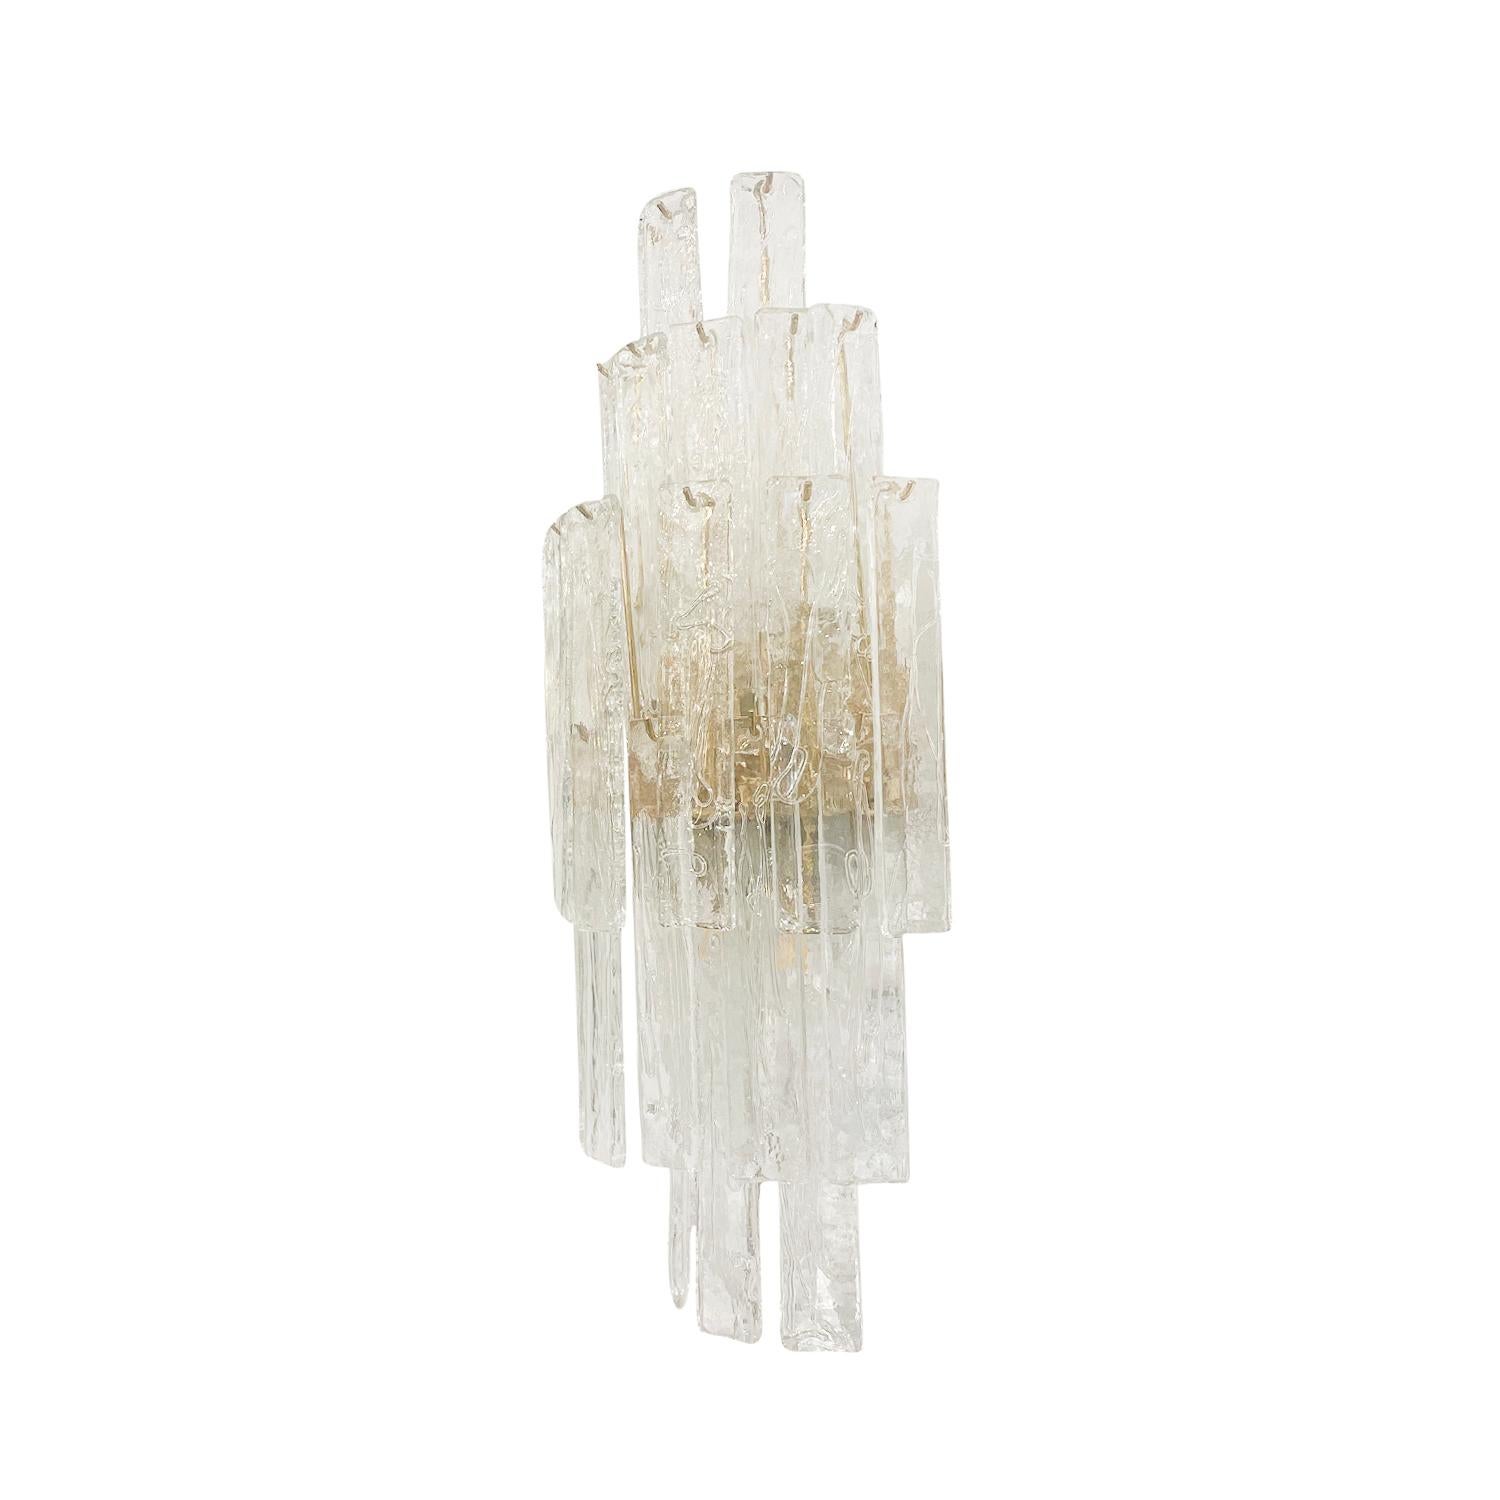 A vintage Mid-Century modern Italian pair of large wall appliques, sconces made of hand blown slightly smoked Pulegoso Murano glass, designed and produced by La Murrina in good condition. Each fixture is composed with twenty-six rectangular detailed